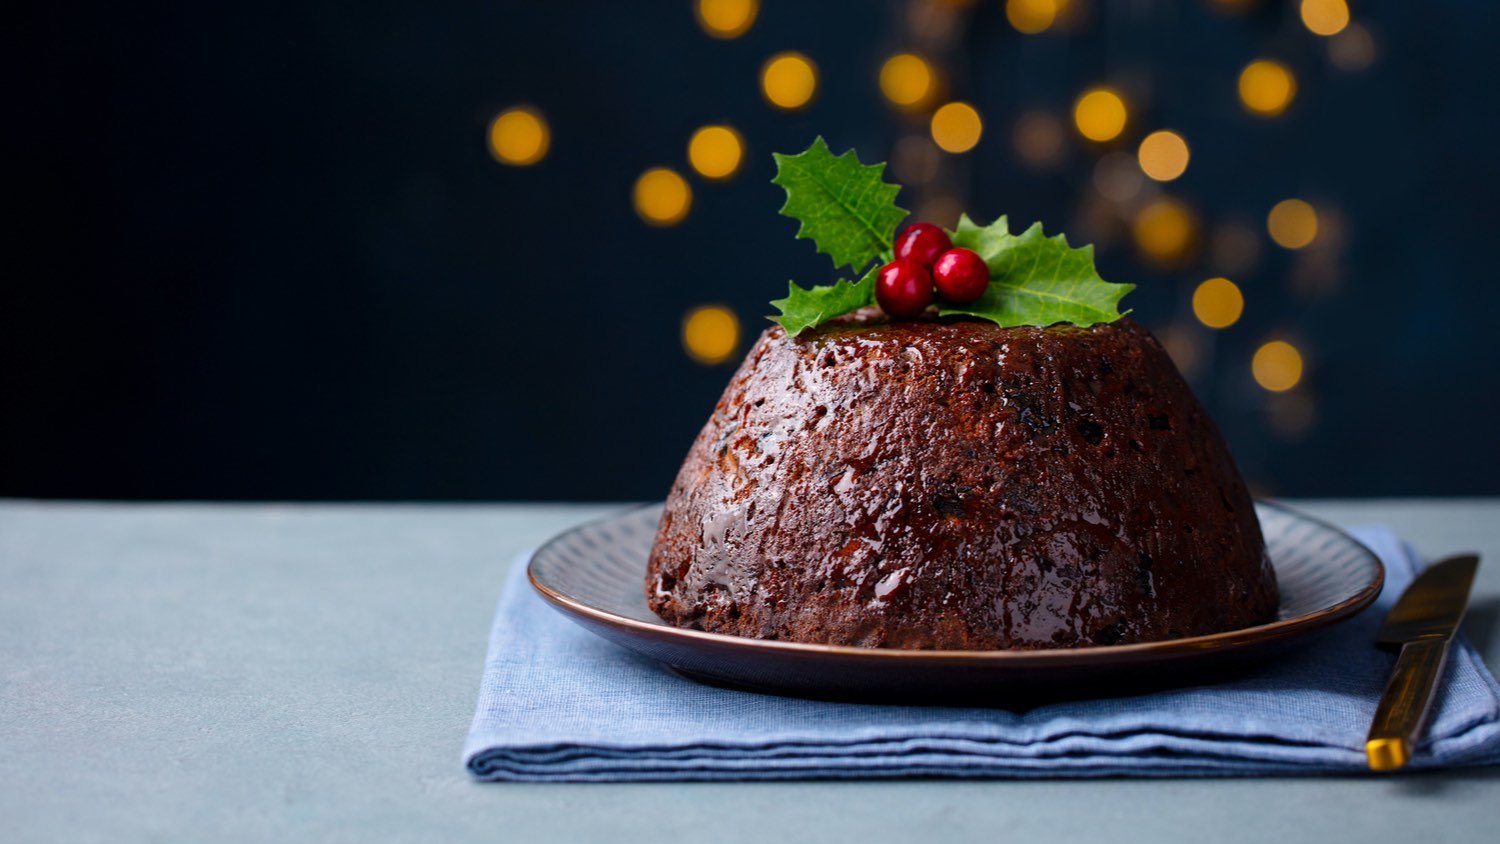 The Royal Kitchen Just Released the Queen’s Favourite Boozy Christmas Pudding Recipe